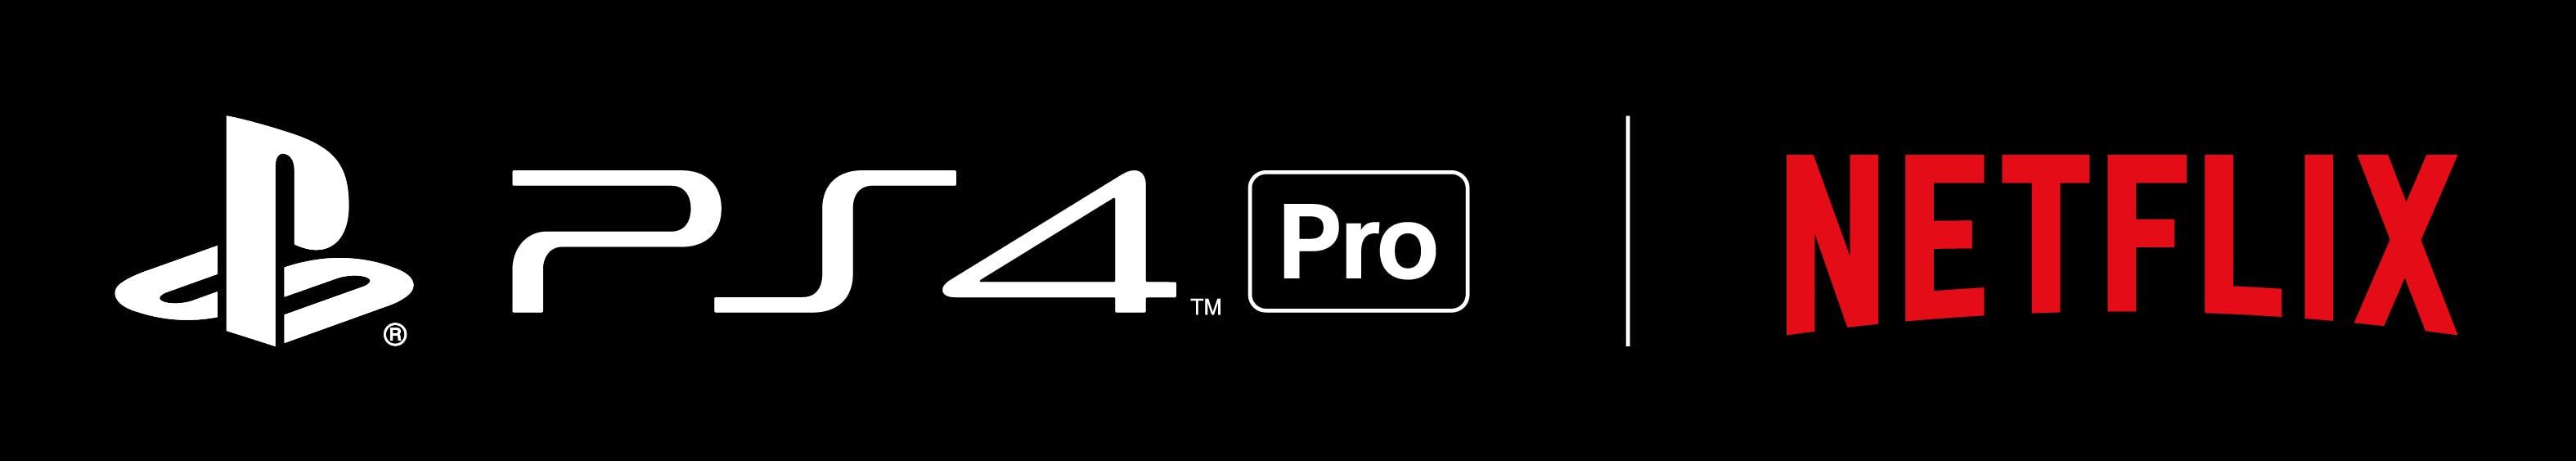 Netflix will provide 4K streaming video for PS4 Pro, but is that enough?